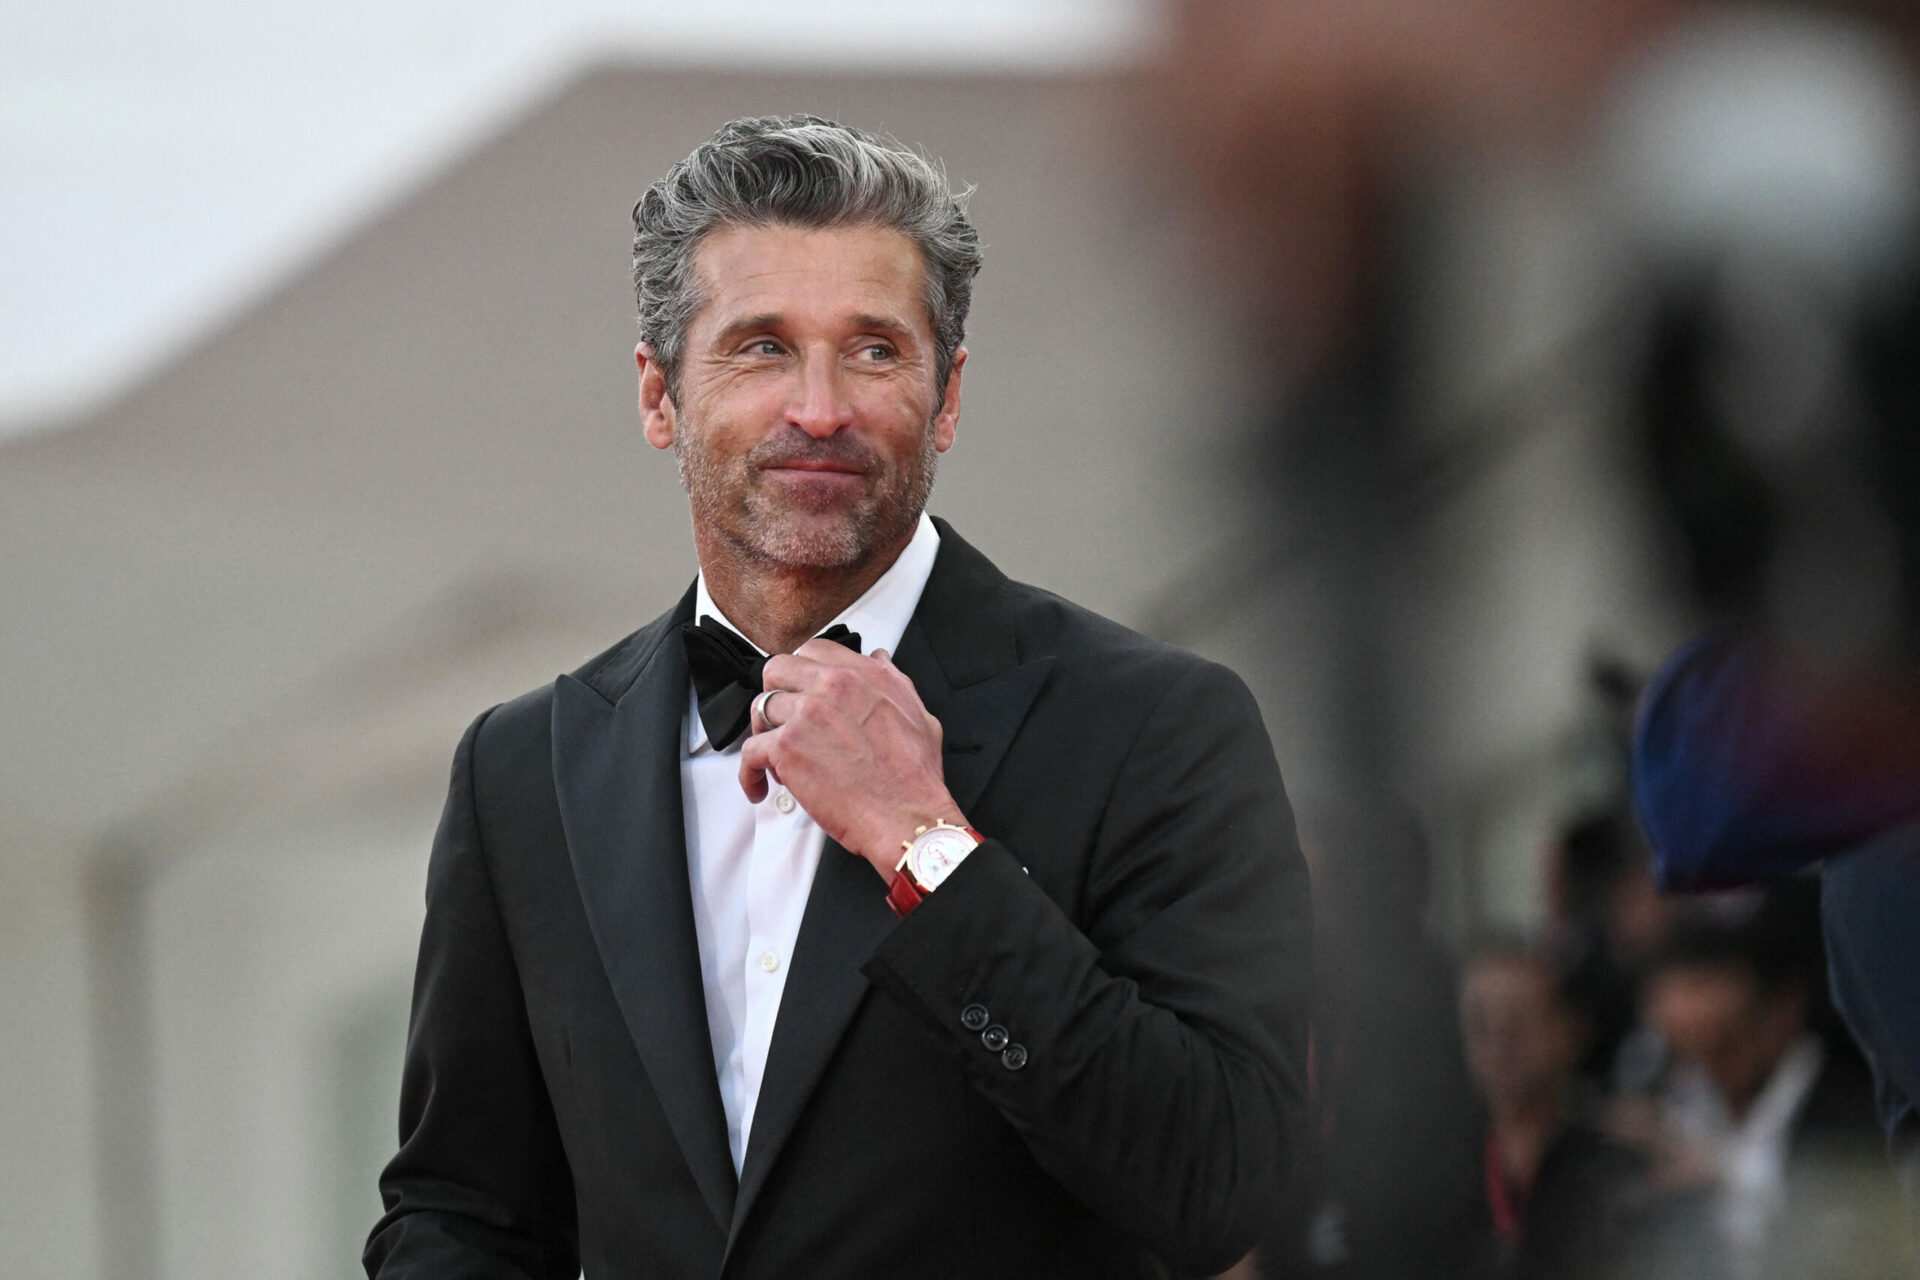 Paging McDreamy: Patrick Dempsey 'finally' named People's Sexiest Man Alive